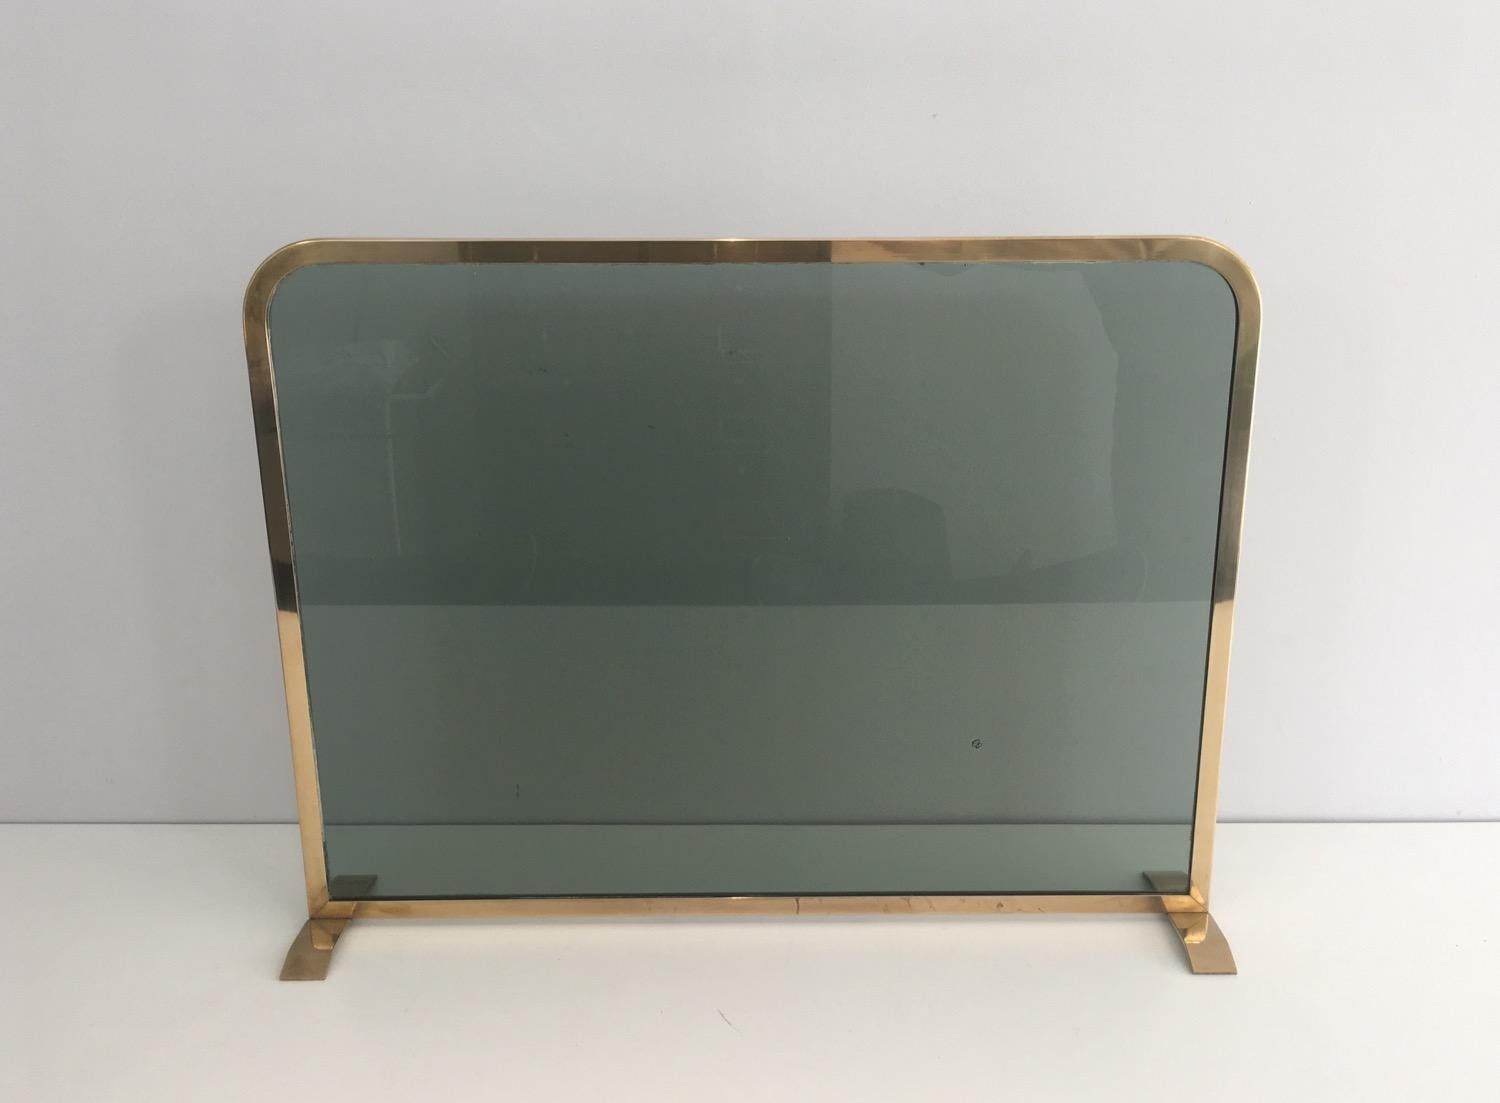 Brass and tempered glass fire place screen, circa 1970.